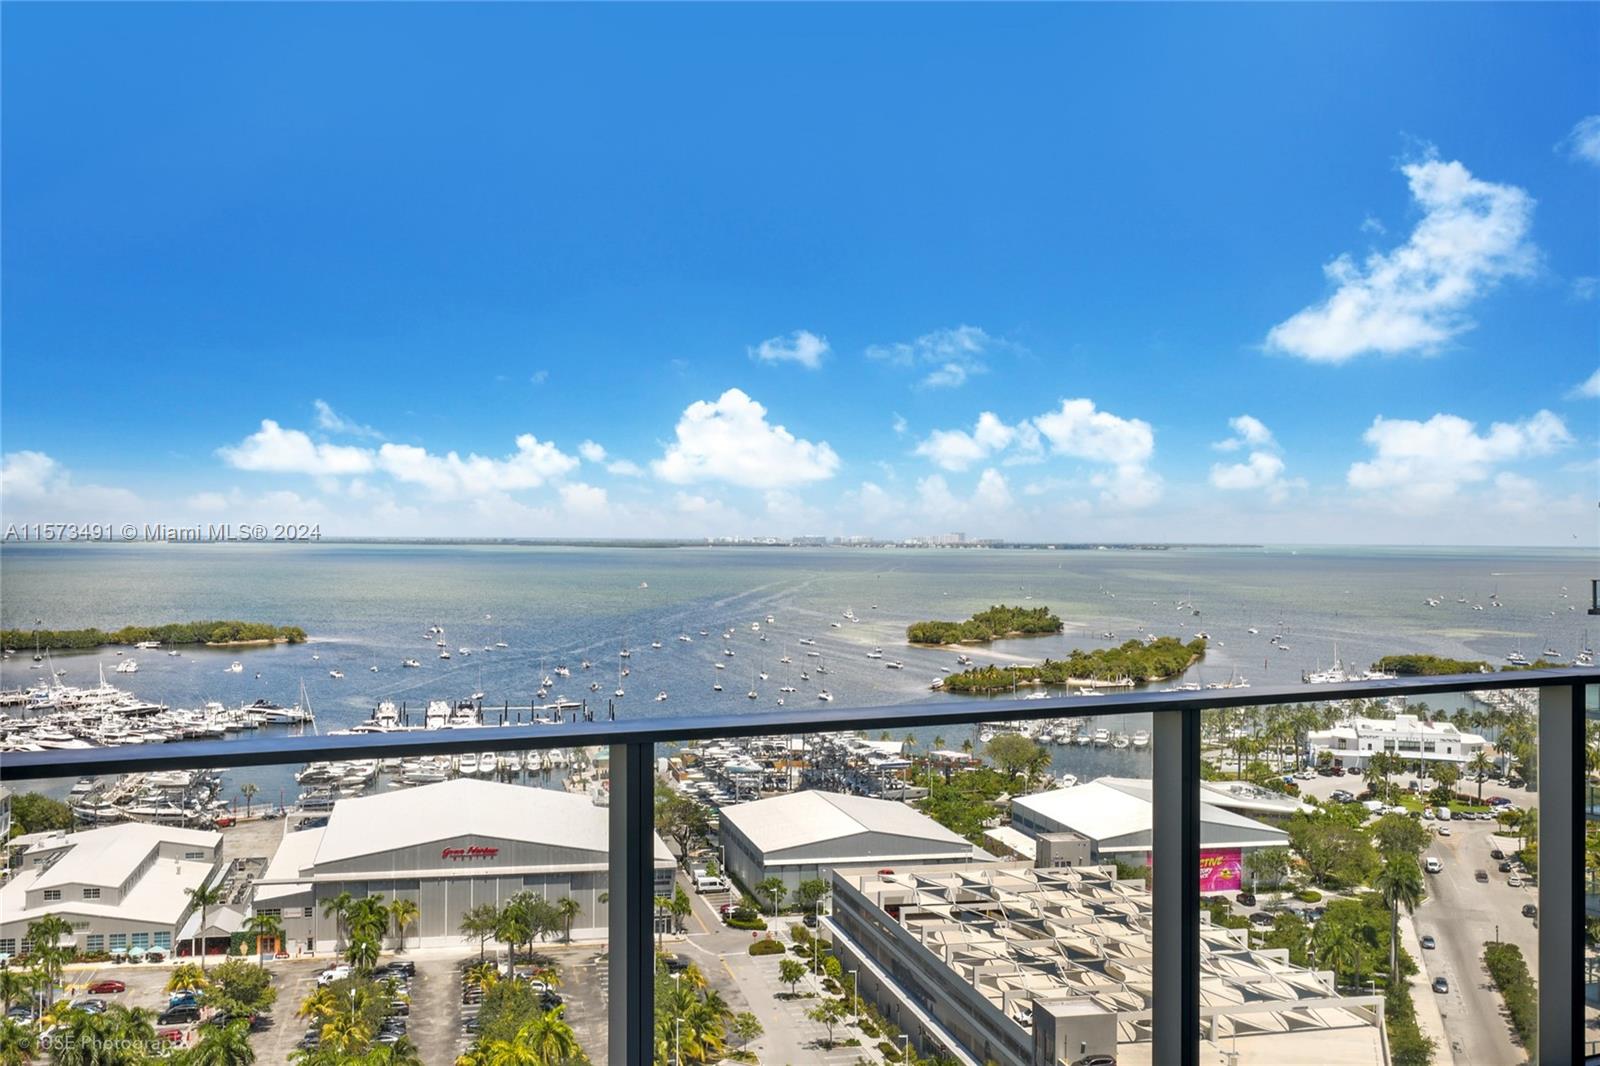 Absolutely astonishing 6 bed / 6 bath in Miami’s hottest waterfront luxury condominium. Immense balcony with amazing view of the ocean and breathtaking sunset, very spacious interior. Building offers high end design amenities including fitness center, rooftop pool, spa, pet spa, children’s playroom, and library.